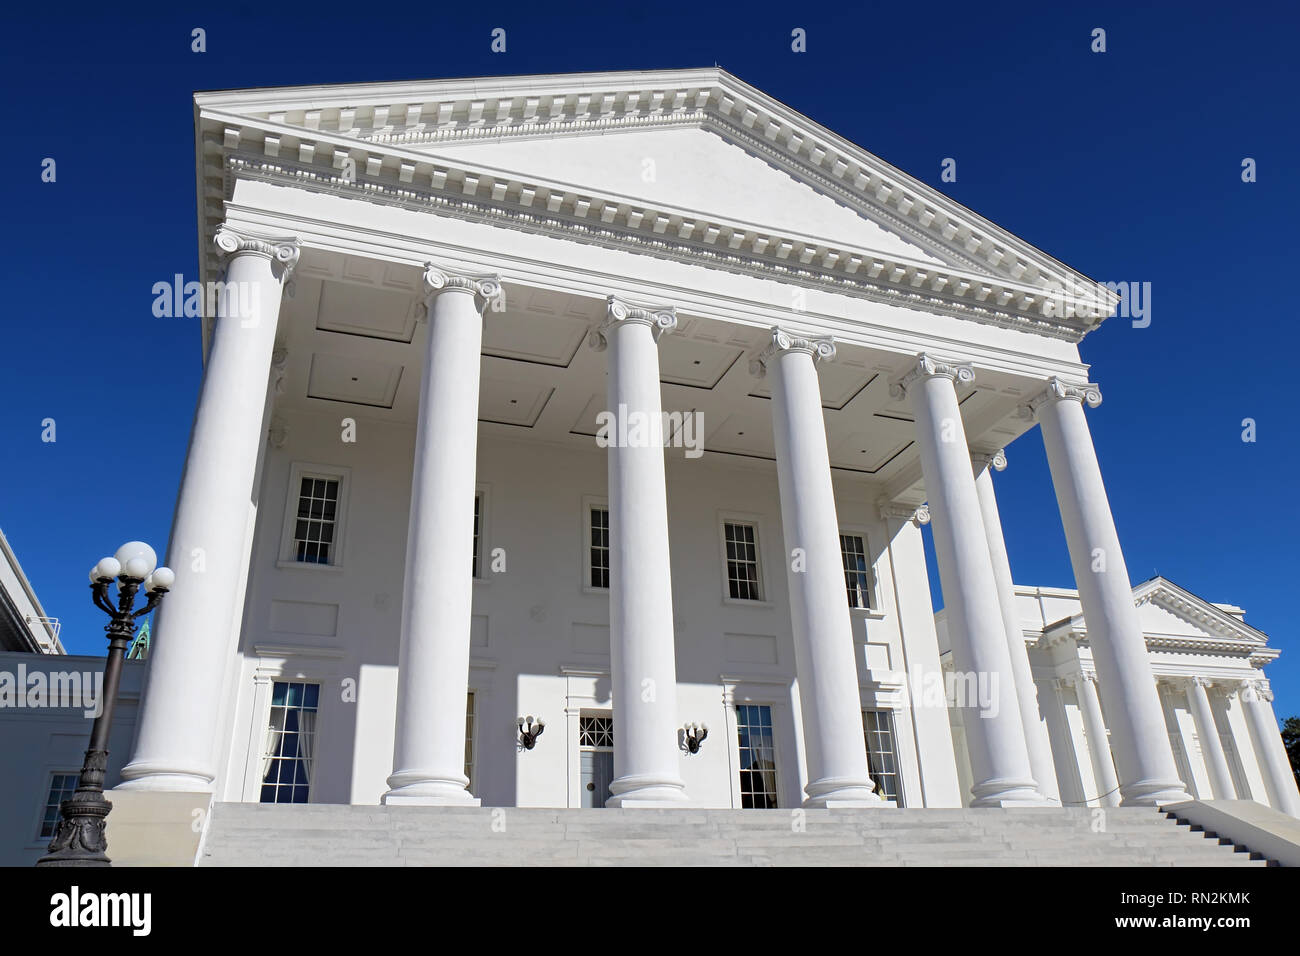 Front facade and columns of the neoclassical Virginia State Capitol building in Richmond against a bright blue sky Stock Photo